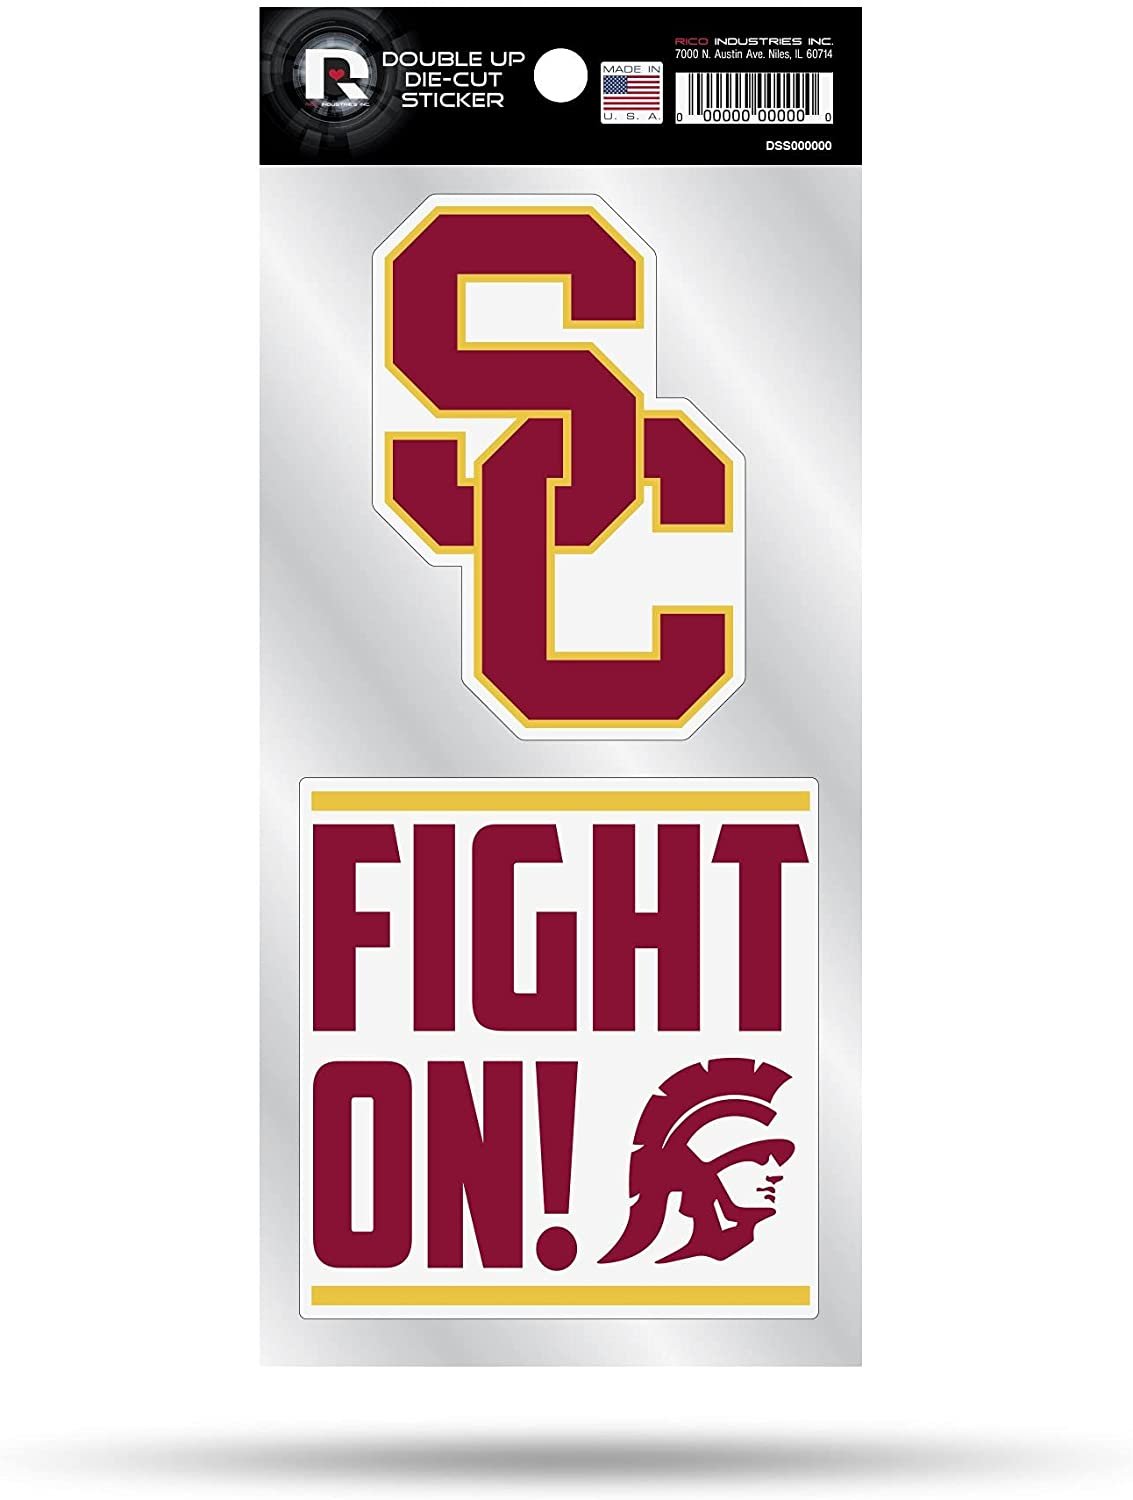 University of Southern California Trojans USC 2-Piece Double Up Die Cut Sticker Decal Sheet, 4x8 Inch